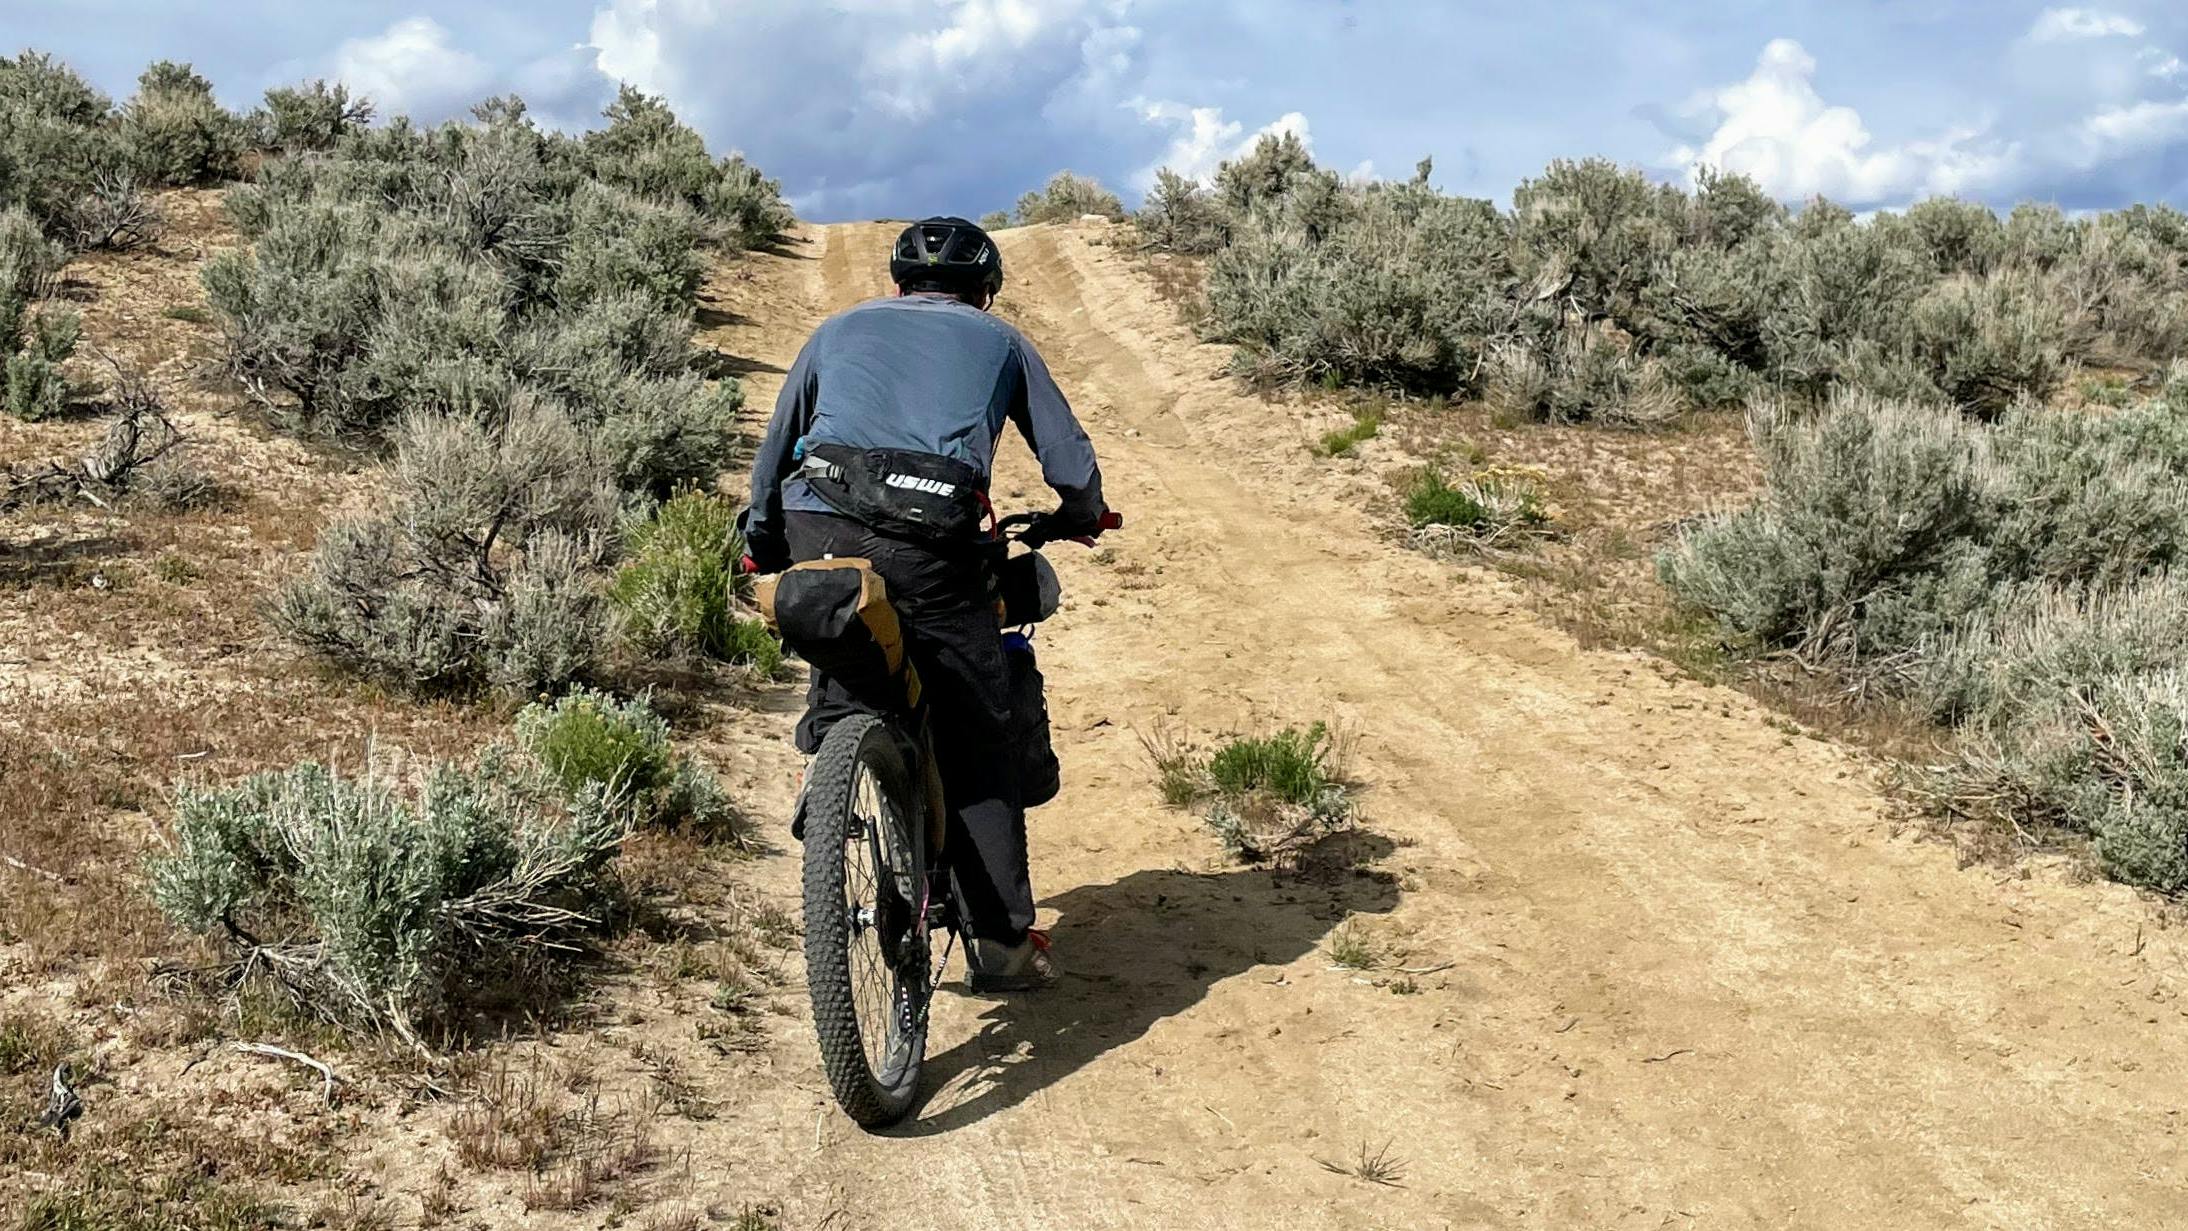 A biker rides up a dirt trail. There is sagebrush on the sides of the trail.